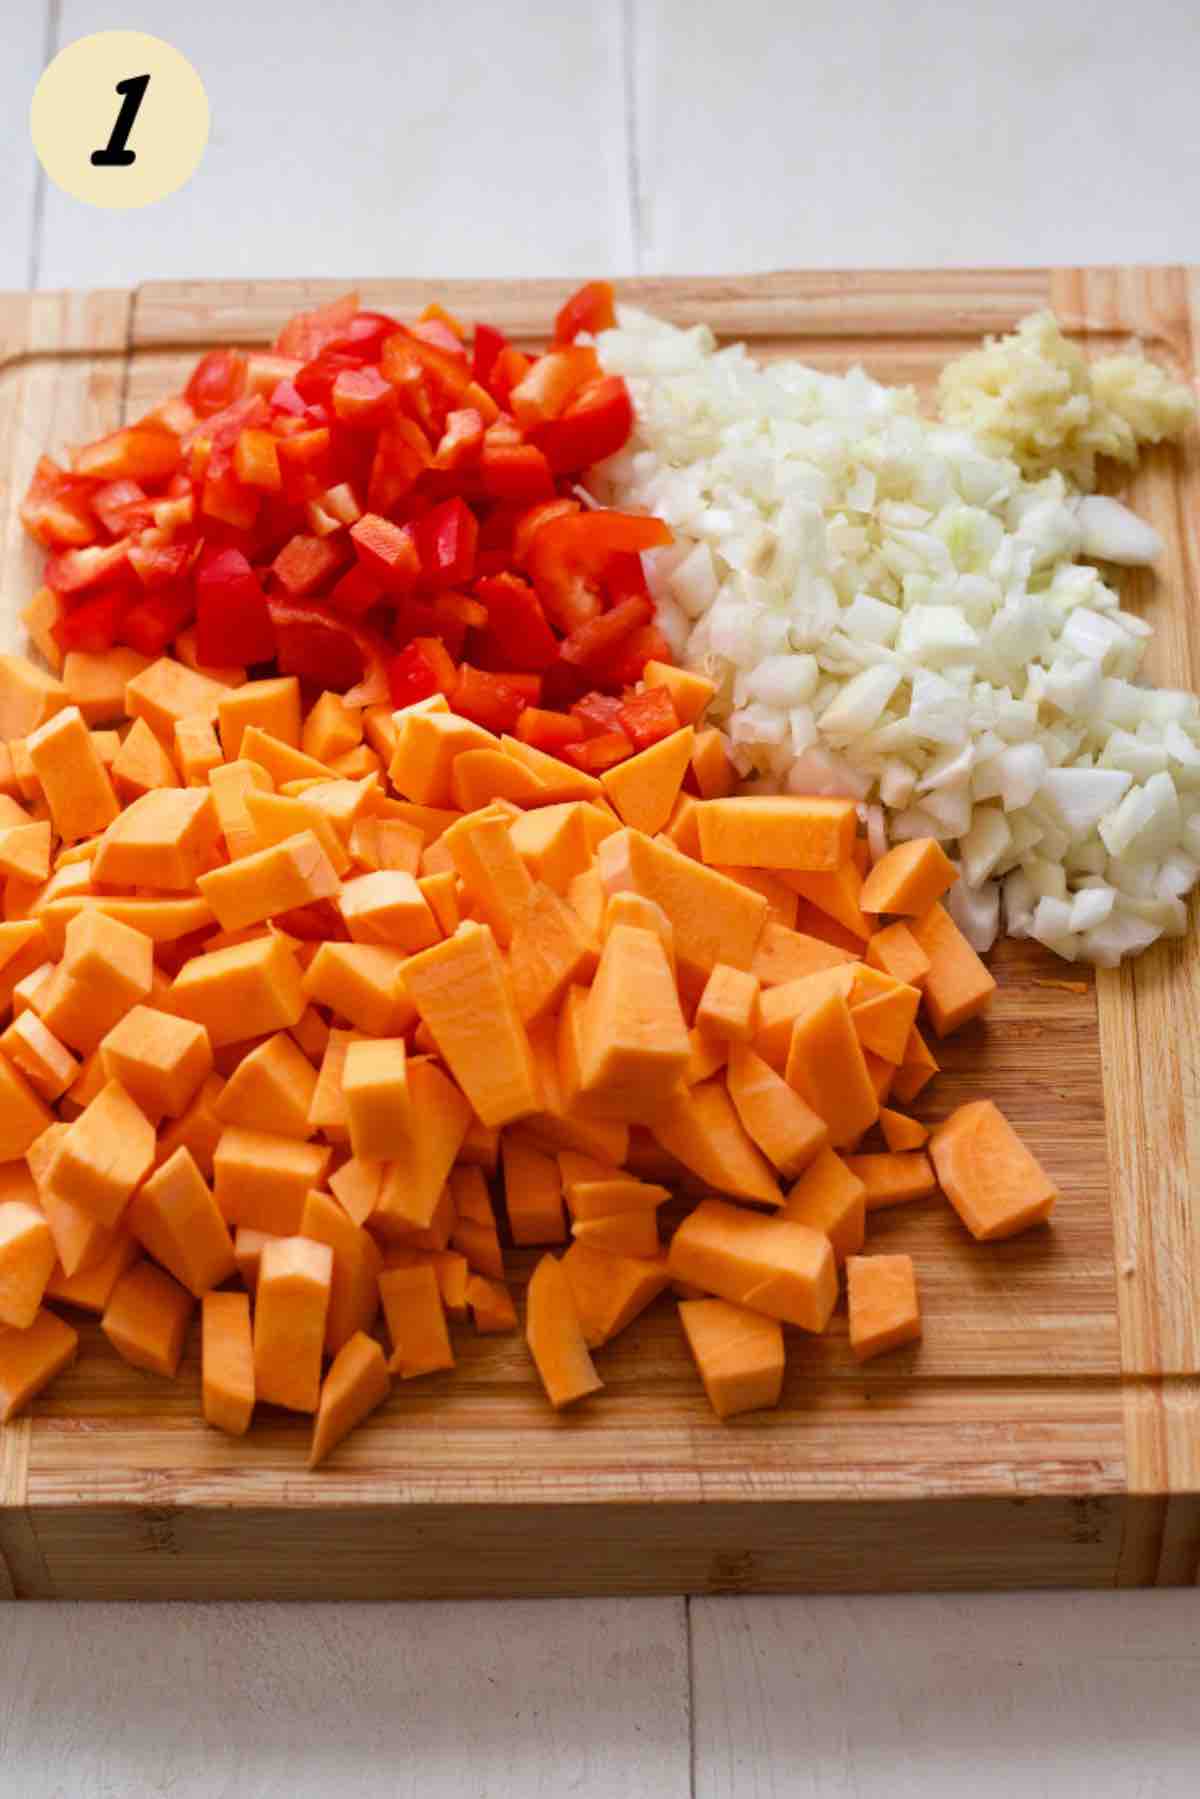 Chopped up vegetables on the board.